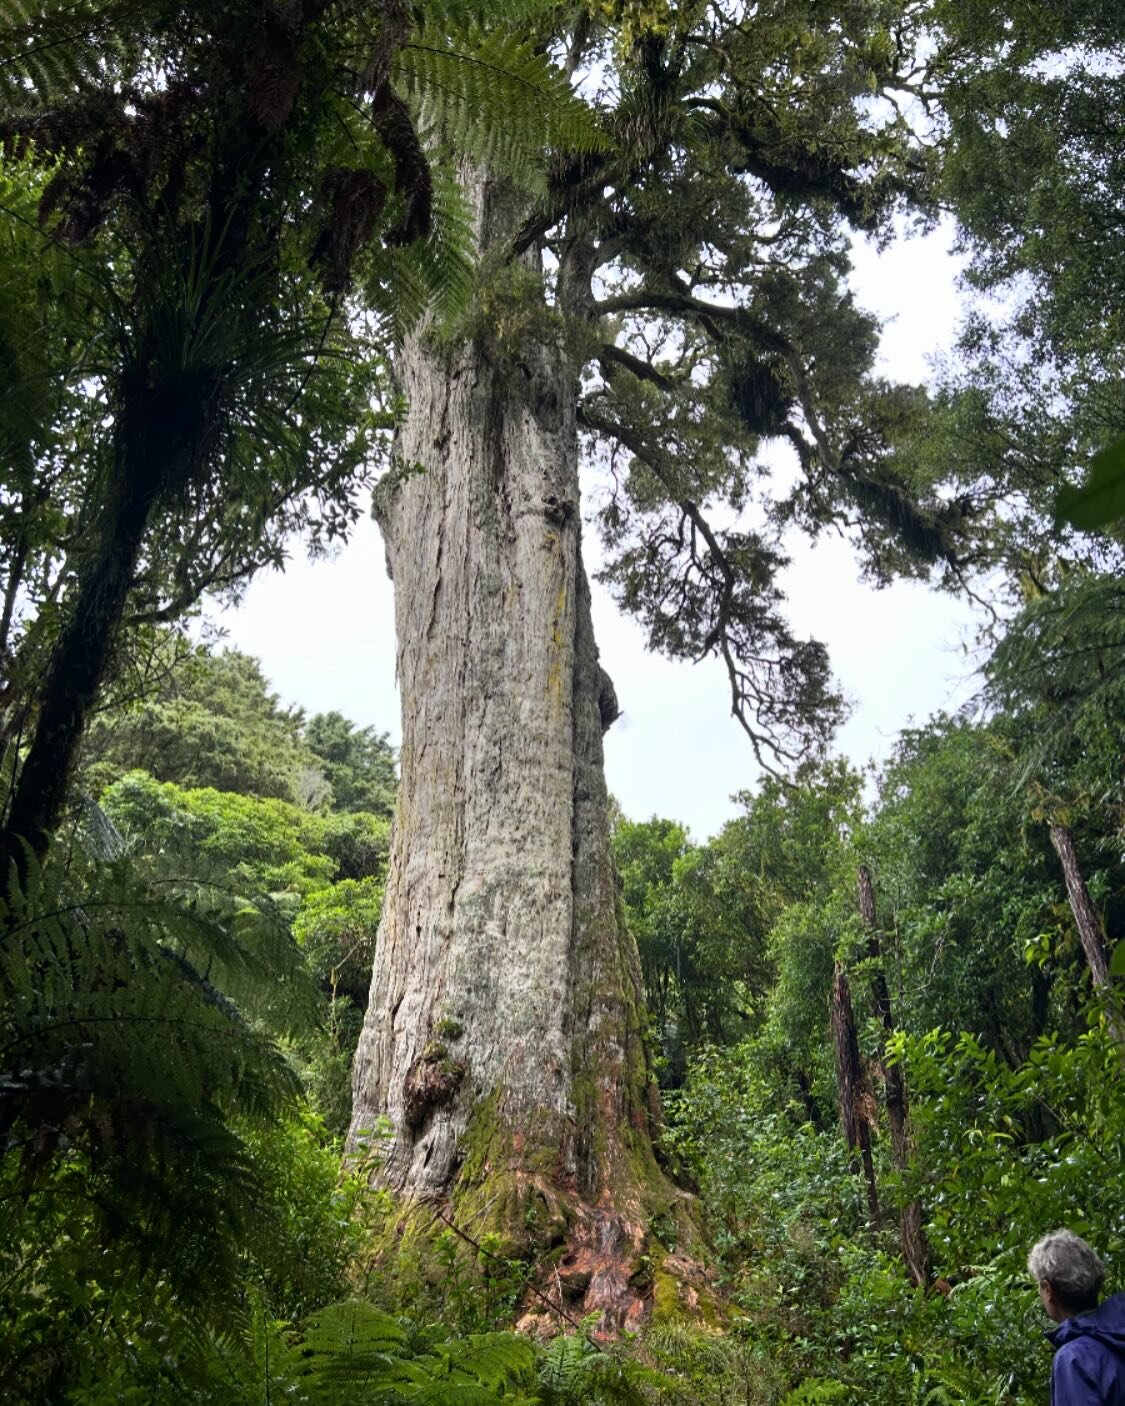 Our last day in Pureora we visited Pouakani, the largest known Totara in Aotearoa. Humbling to think it could be 1800 years old. #totara #largesttree #nztrees #pouakani